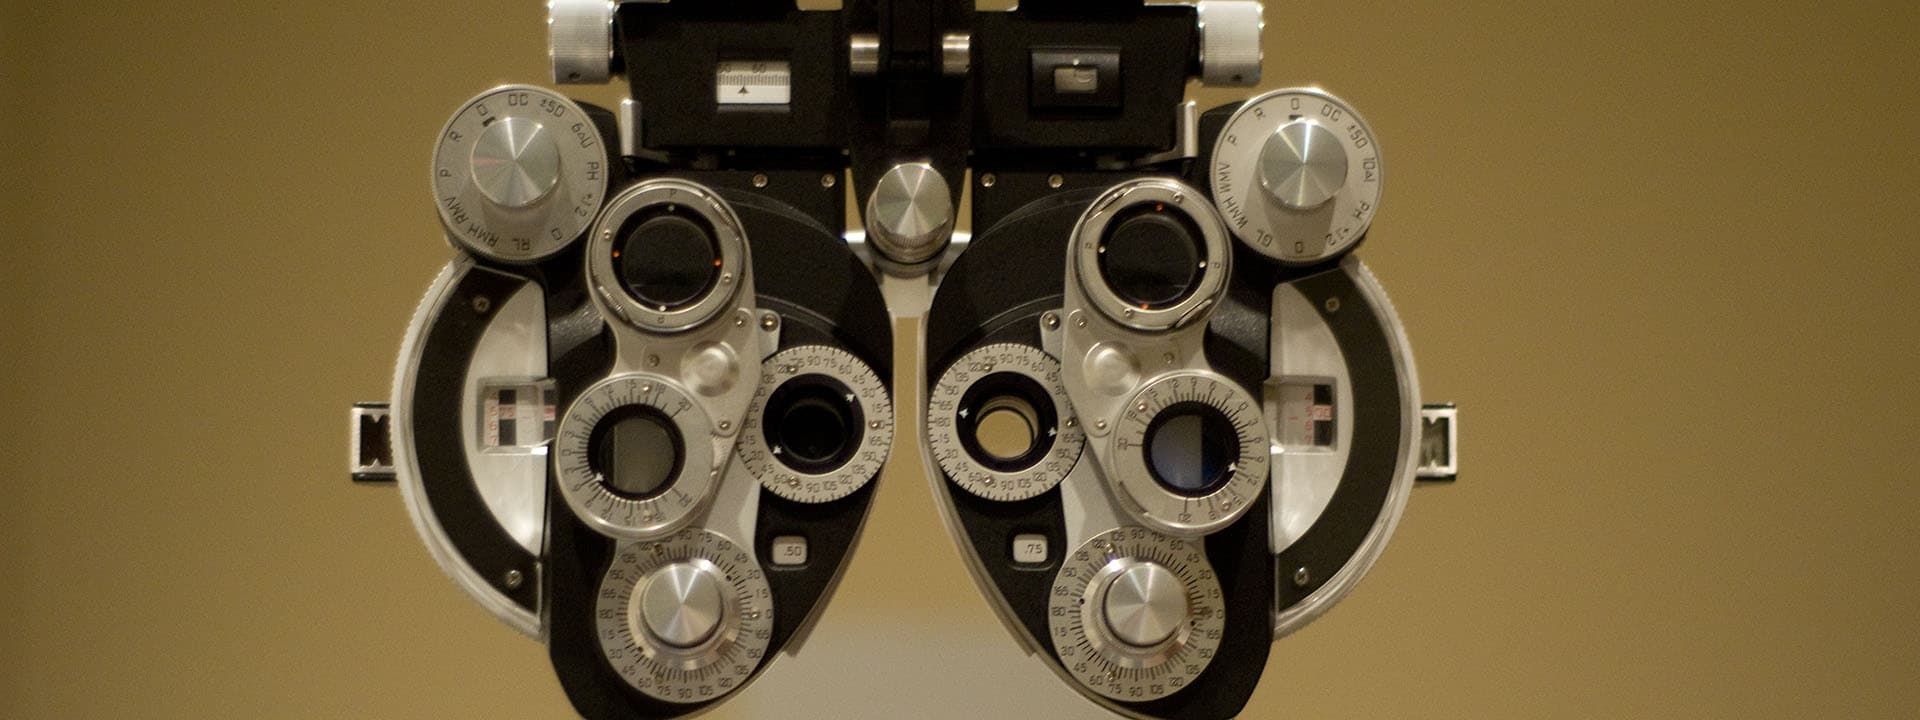 A phoropter in the Vision Care lab